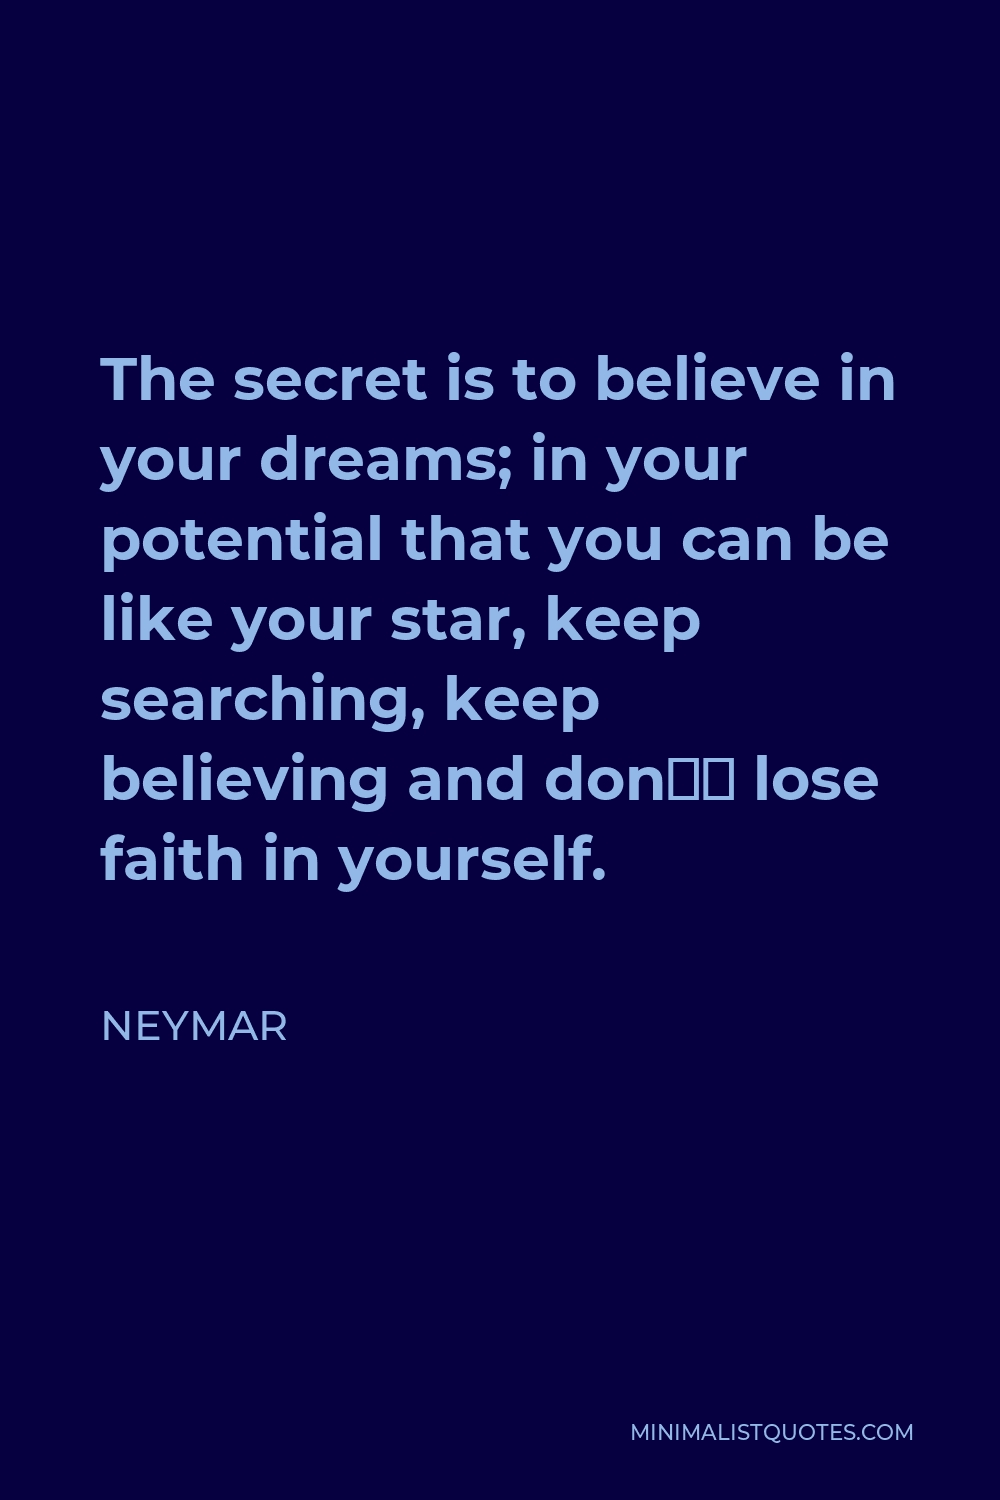 Neymar Quote - The secret is to believe in your dreams; in your potential that you can be like your star, keep searching, keep believing and don’t lose faith in yourself.